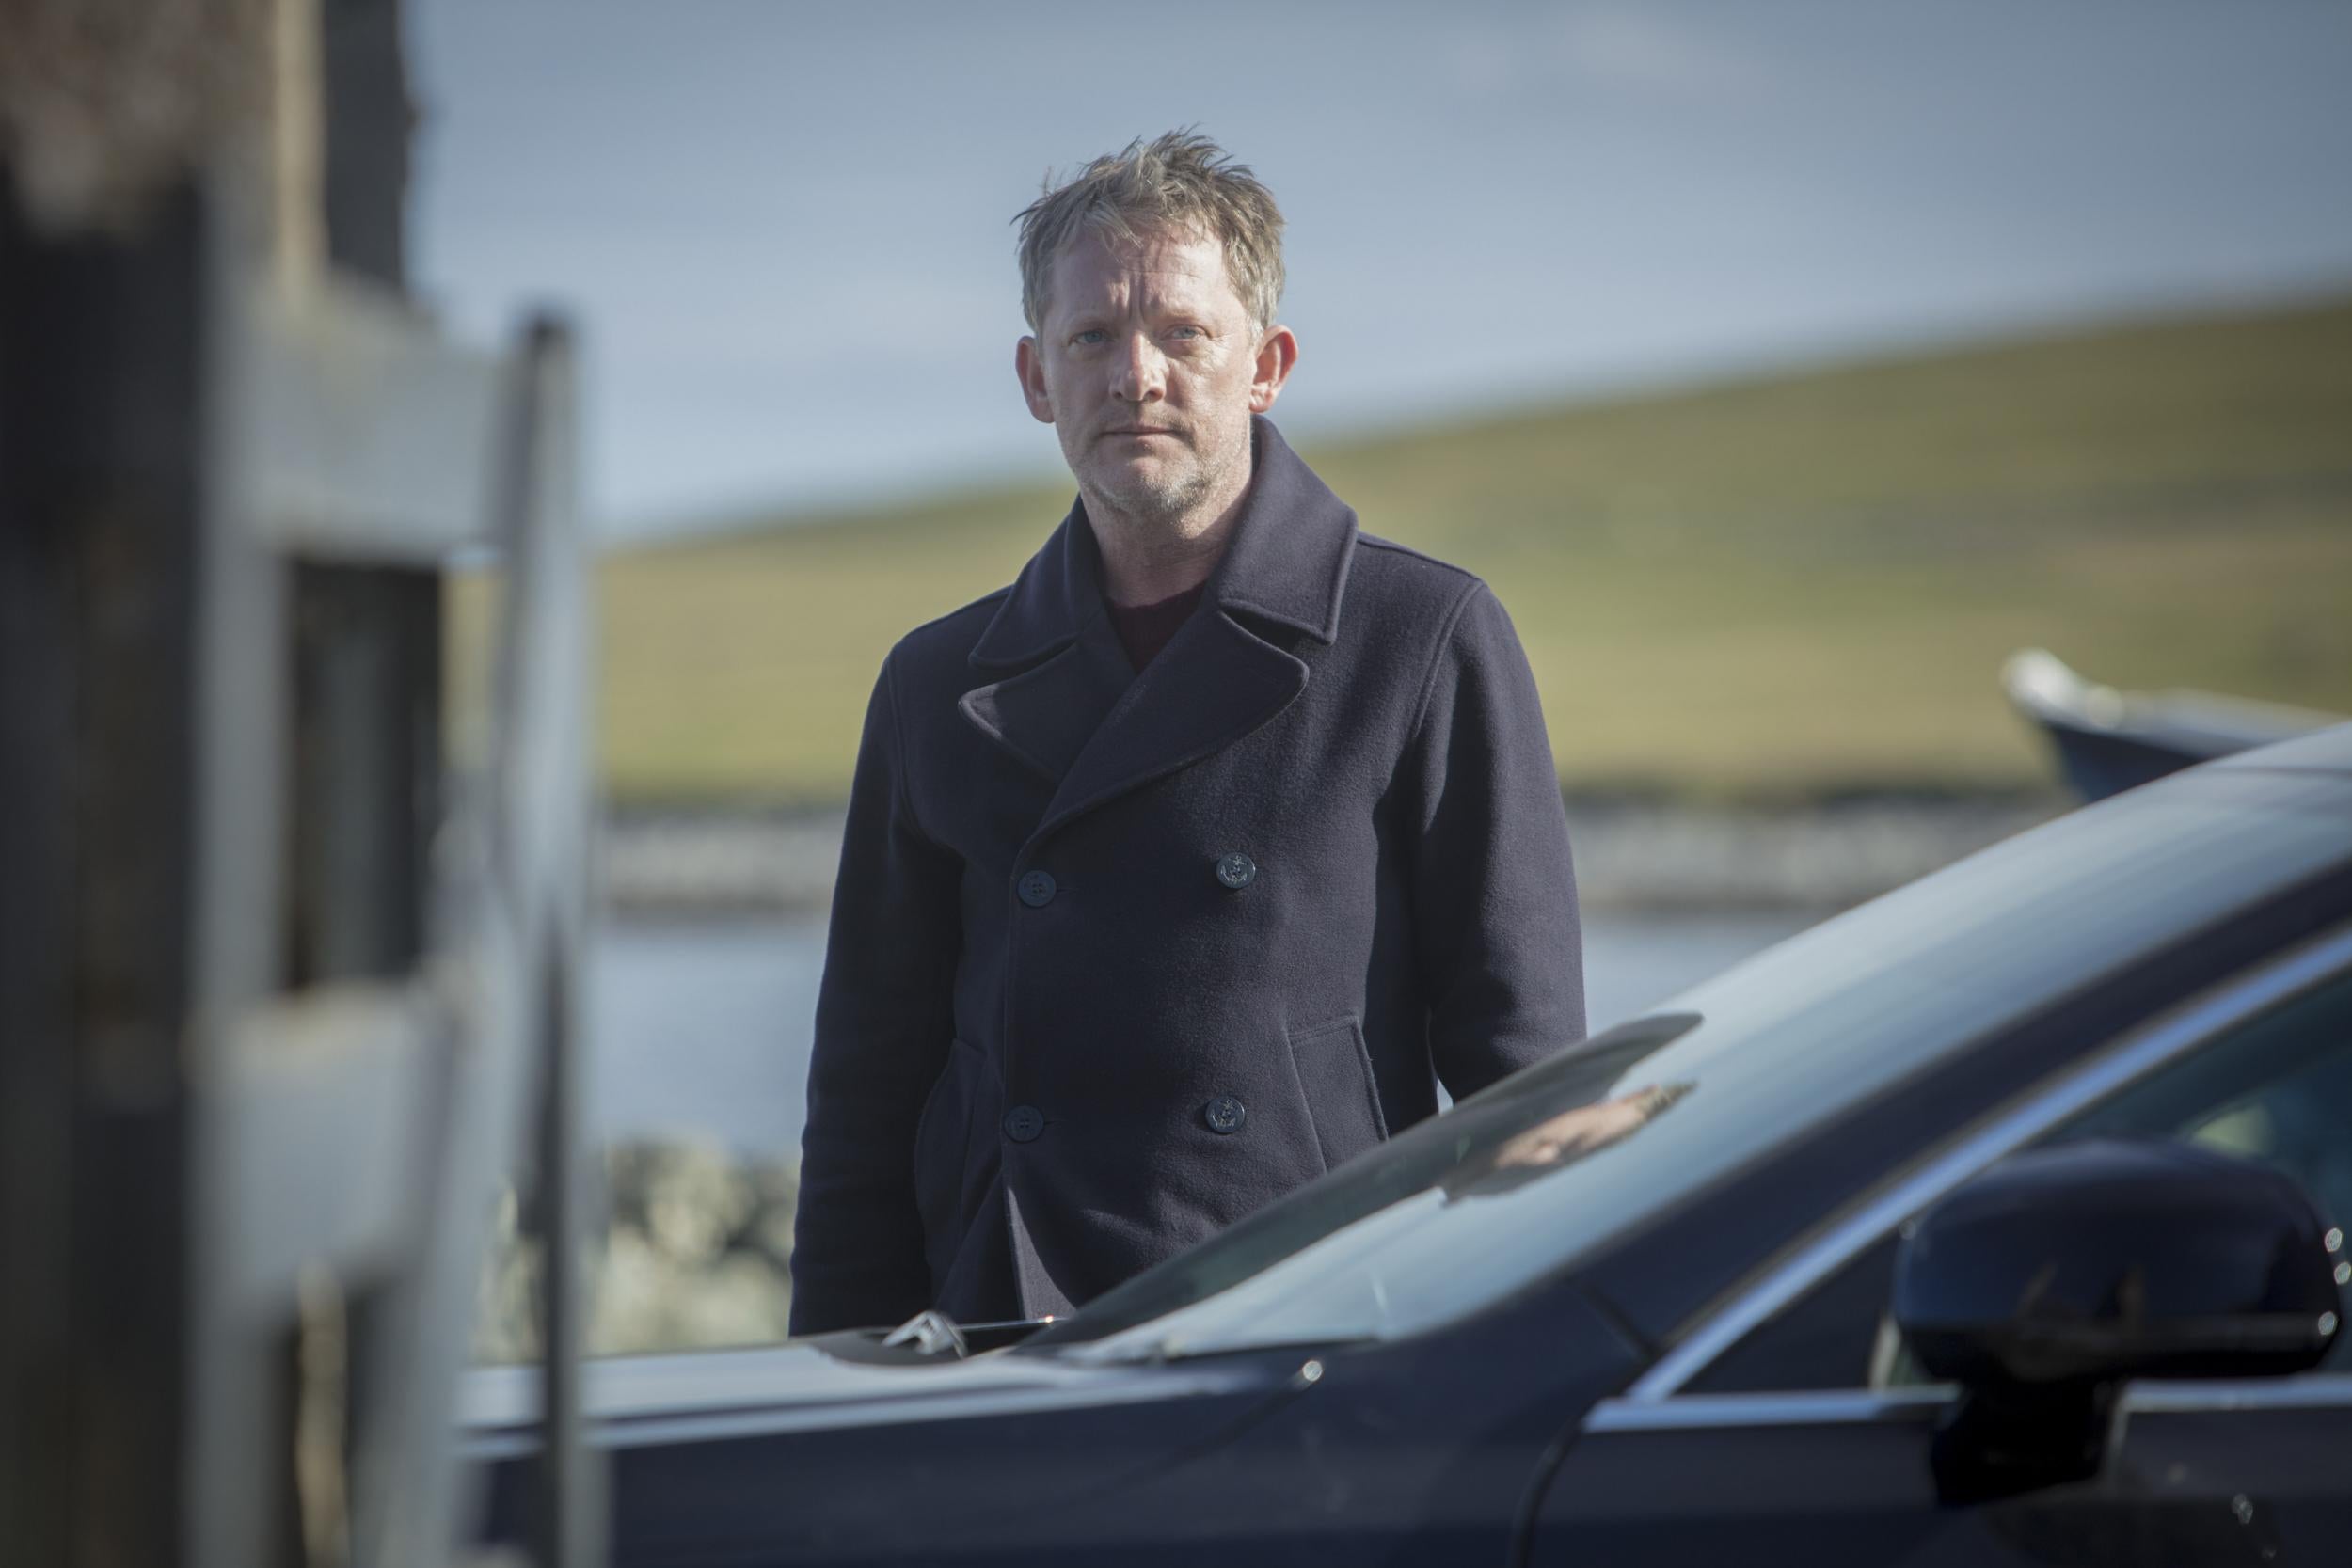 Douglas Henshall has been an underestimated talent for too long, though his day in the sun – well, drizzle – seems to have arrived